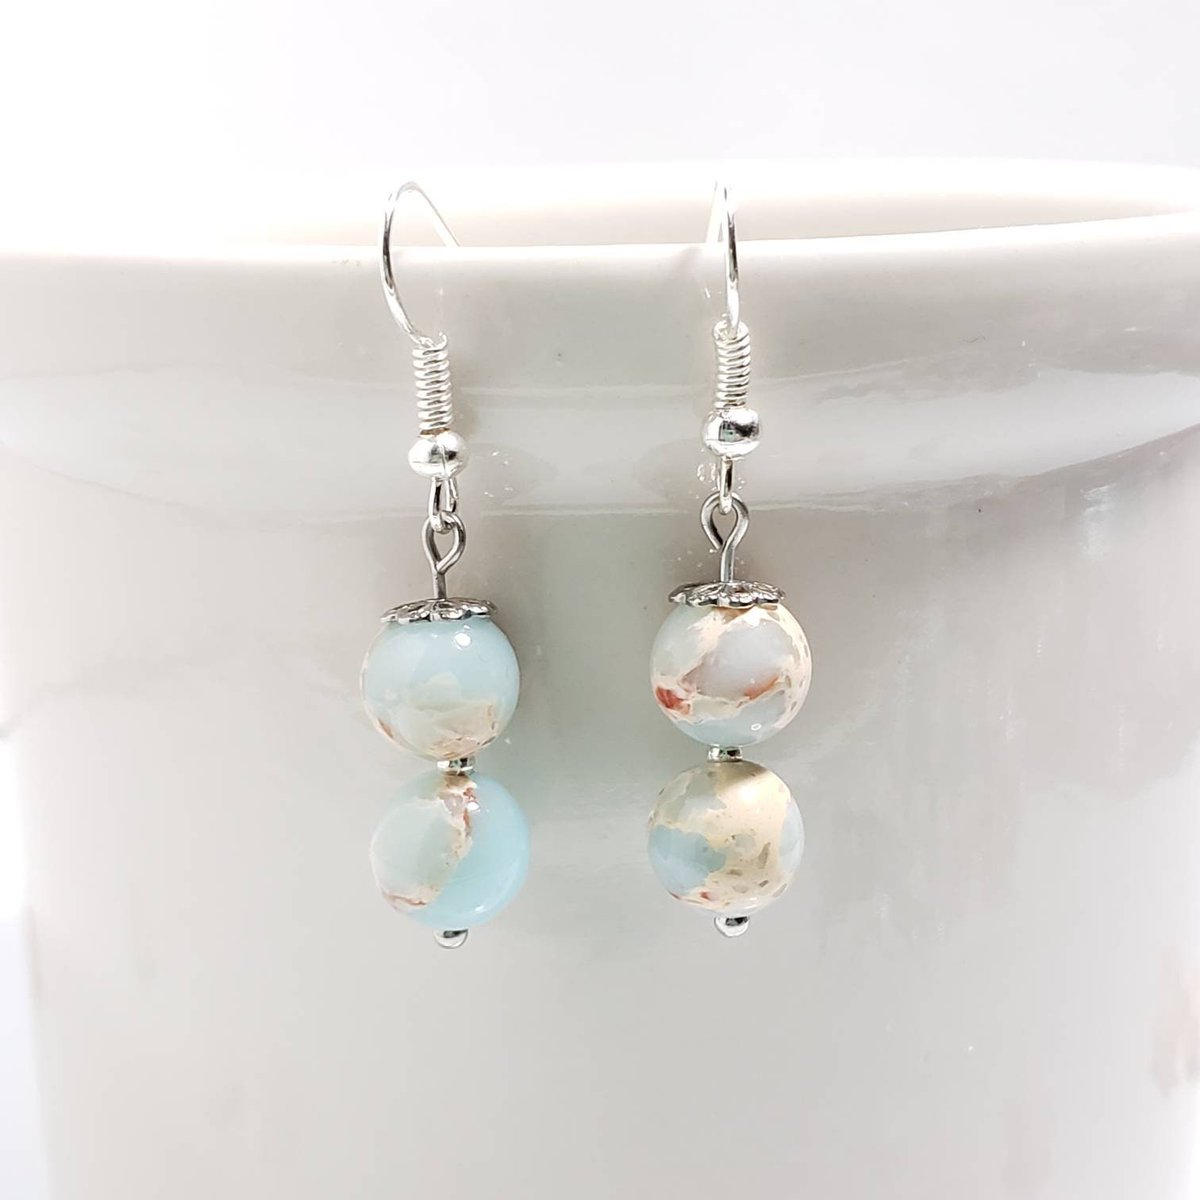 These cute little earrings will make a beautiful Valentines day gift for that special someone #etsy shop: Powder blue jasper bead earrings etsy.me/34ctHIY #blue #silver #earlobe #statementearrings #jasperearrings #dangleearrings  #beadearrings #valentinesday